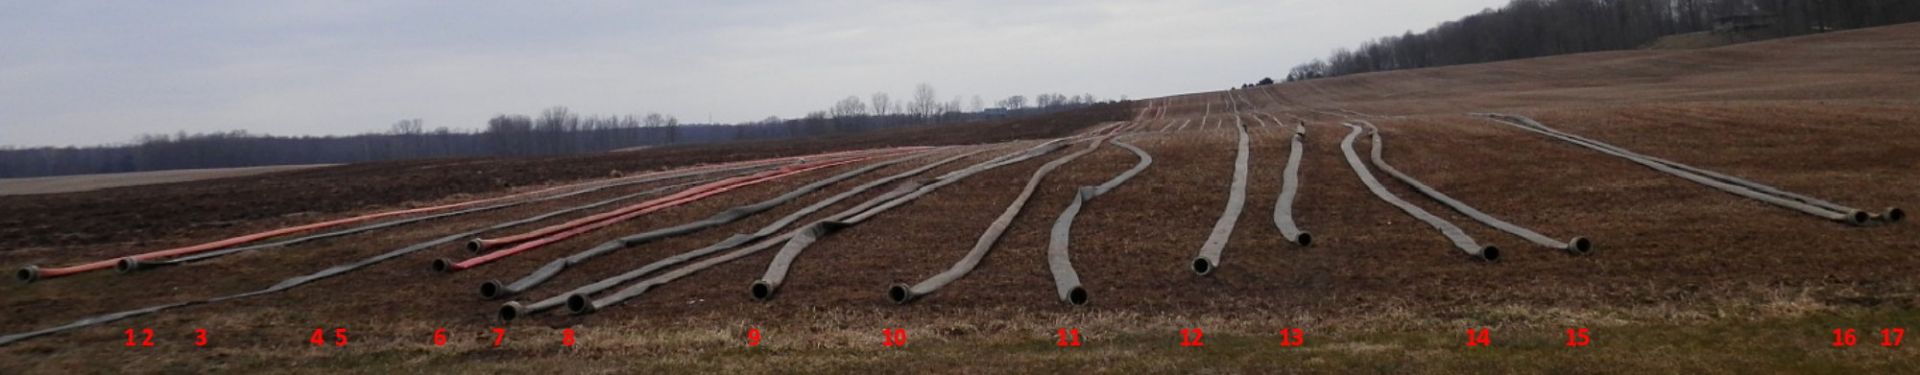 MANURE IRRIGATION HOSE-LAY HOSE, 510 Ft. (Sold by the foot x 510)